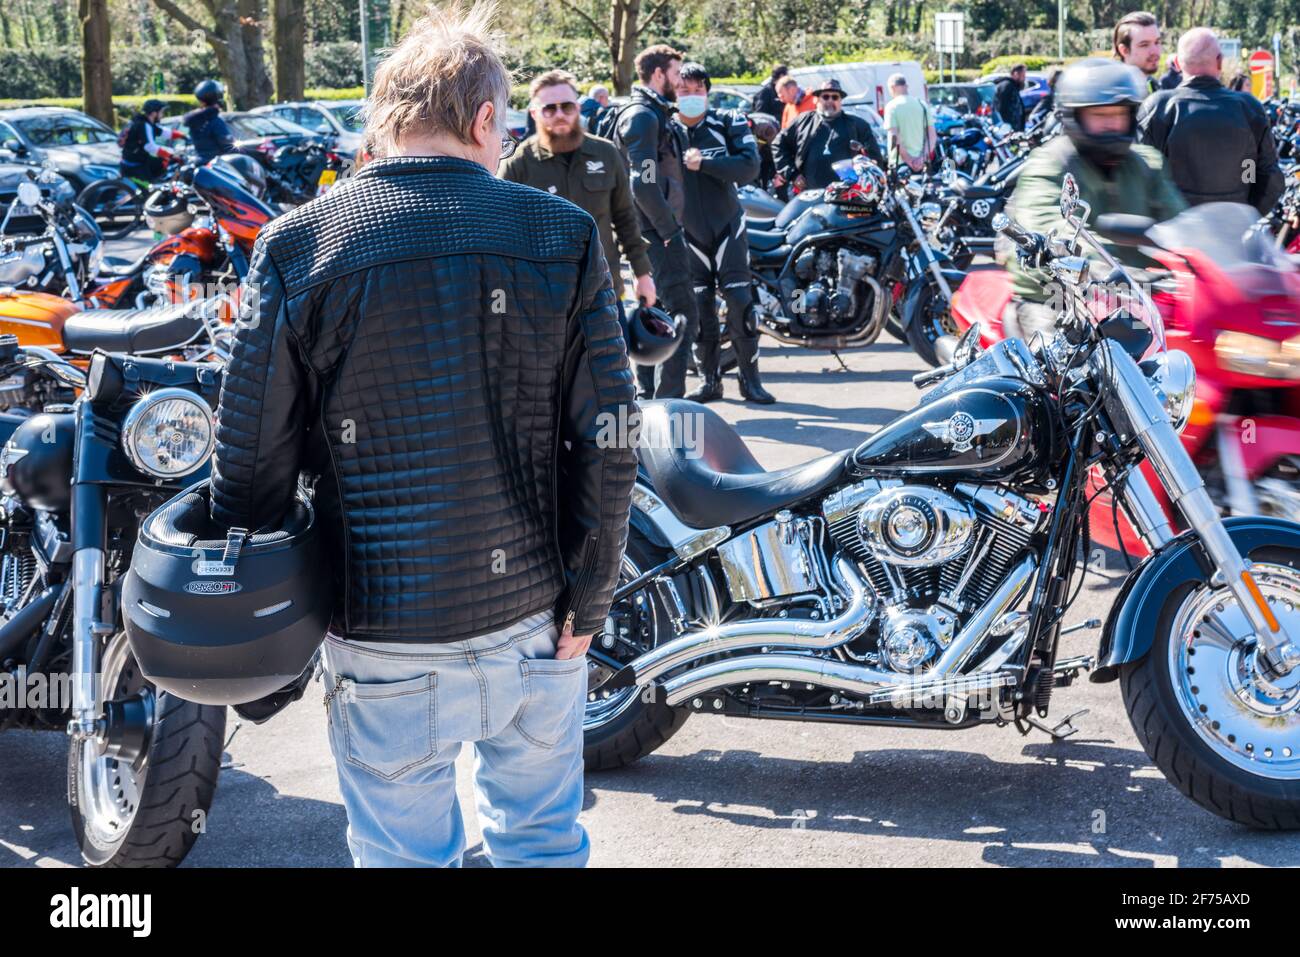 A motorbike rider with helmet in hand admiring a parked Harley Davidson bike on a sunny day Stock Photo